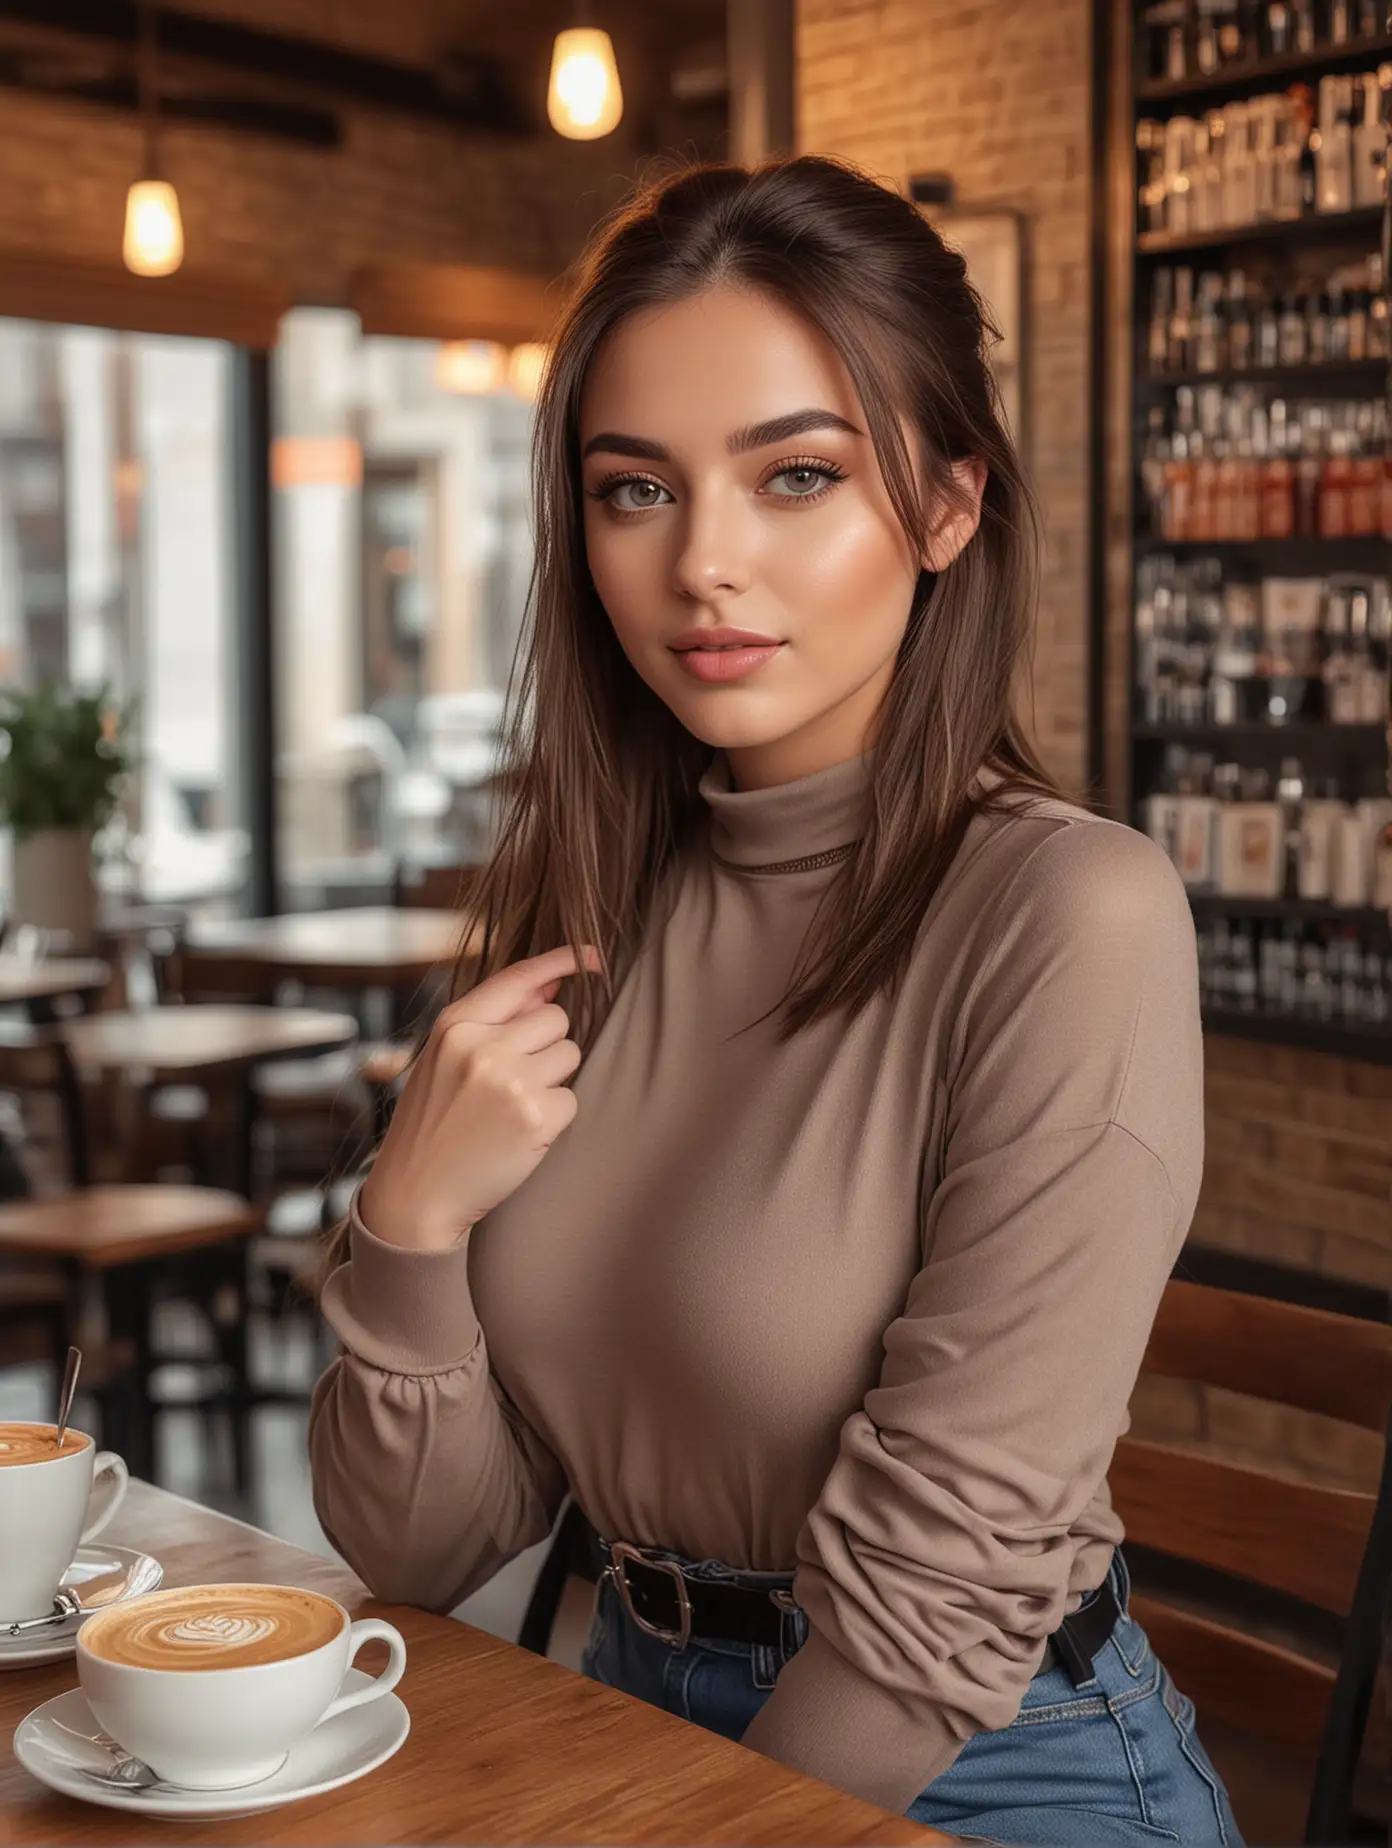 American ，girl, Young, sexy, fashionable clothing and exquisite makeup,  in a cafe, exquisite facial features, facing the camera, professional photography technique, full body shot